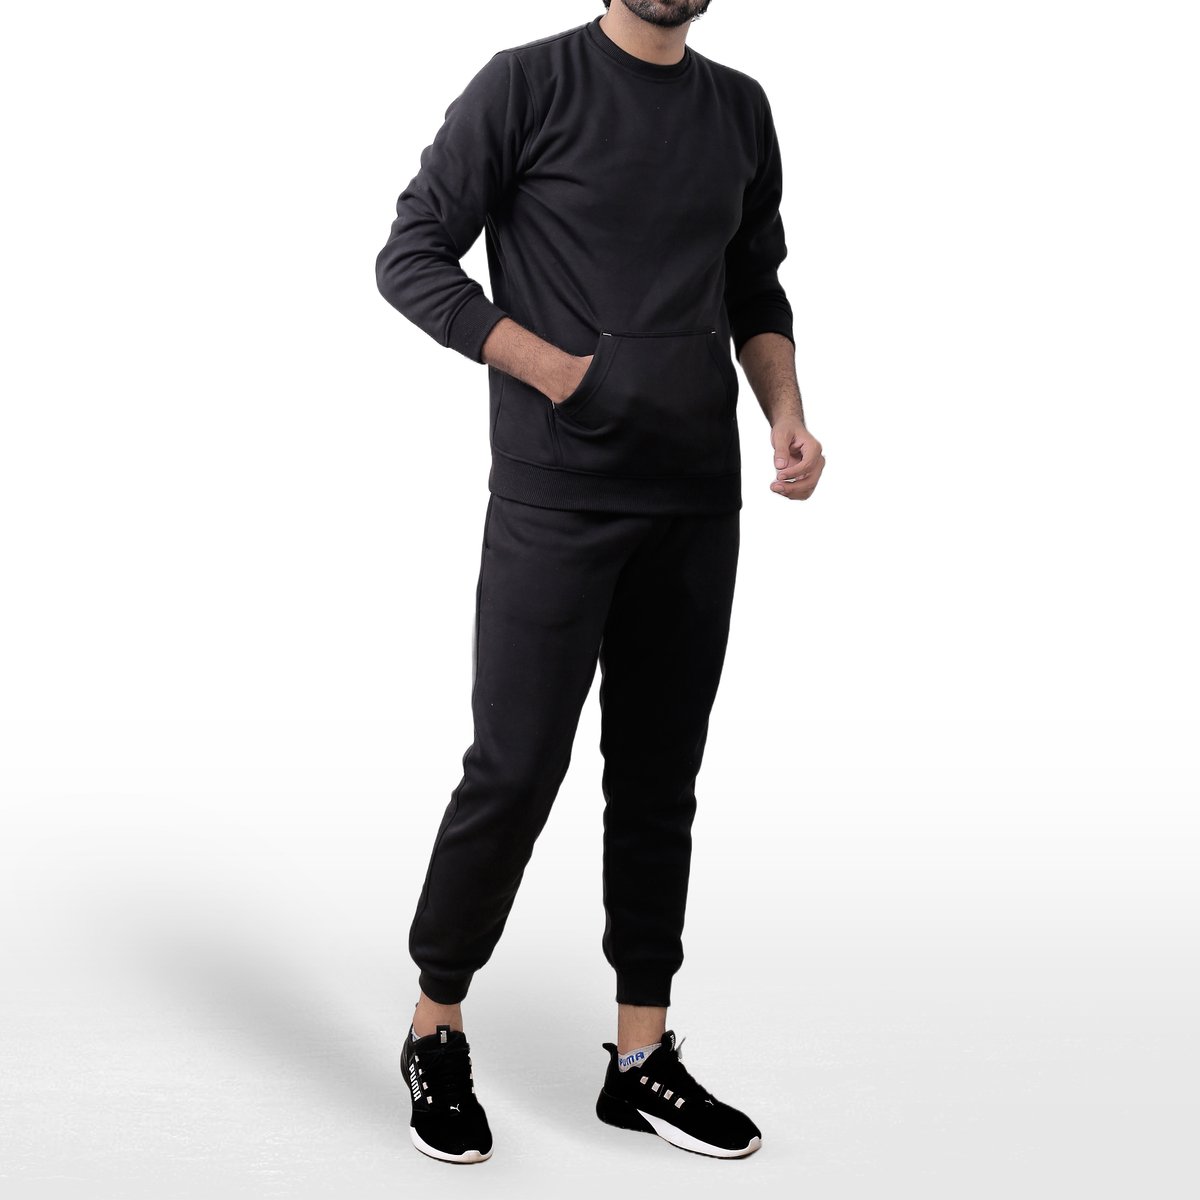 ICONICX Mens Plain Tracksuit Fleece Pullover Sweatshirt with Trousers Cotton Jogging Suit Exercise, Fitness, Boxing MMA, BLACK